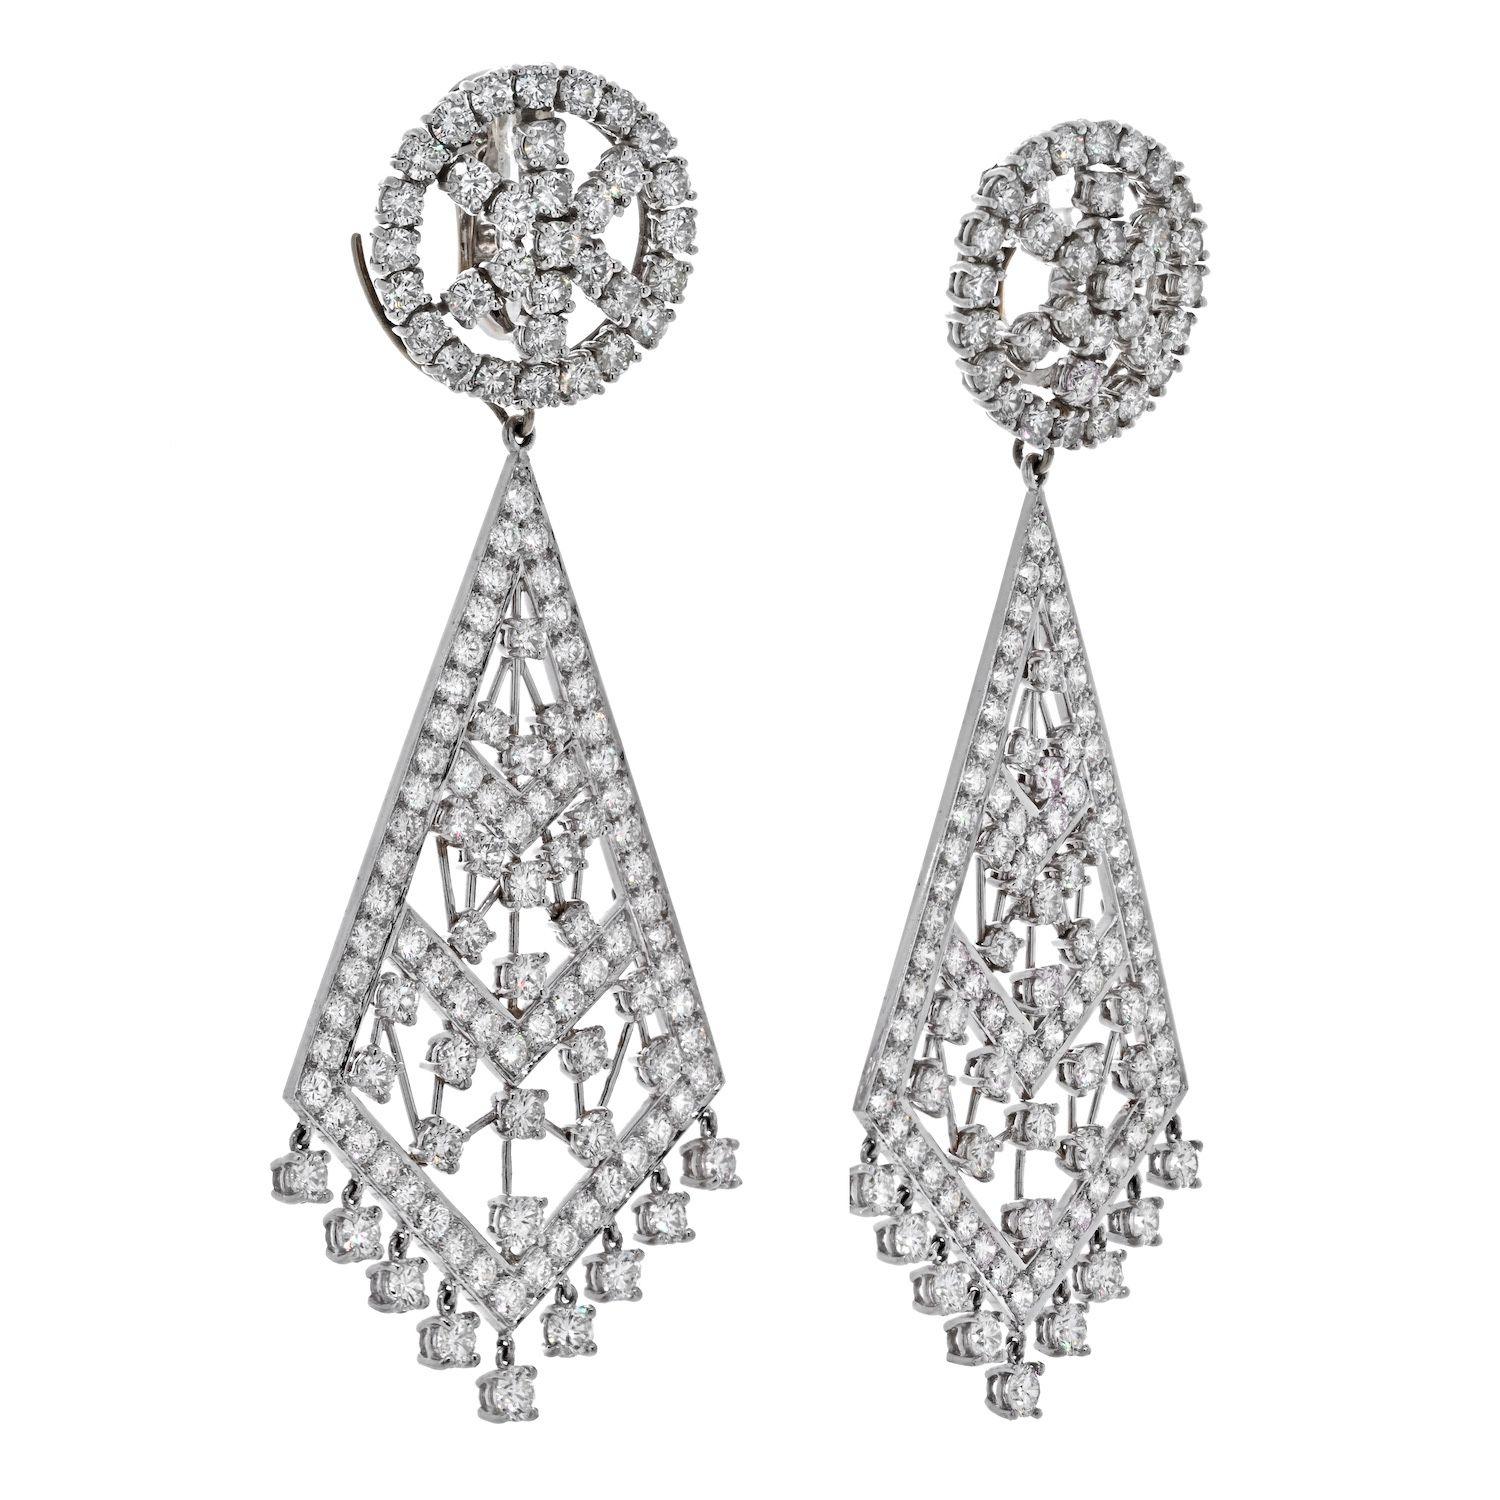 Impressive diamond chandelier earrings by David Webb crafted in Platinum mounted with round cut diamonds of 36.00cttw total weight. Exceptional earrings can be worn day to night with the bottom part easily detachable and top being on it's own as a